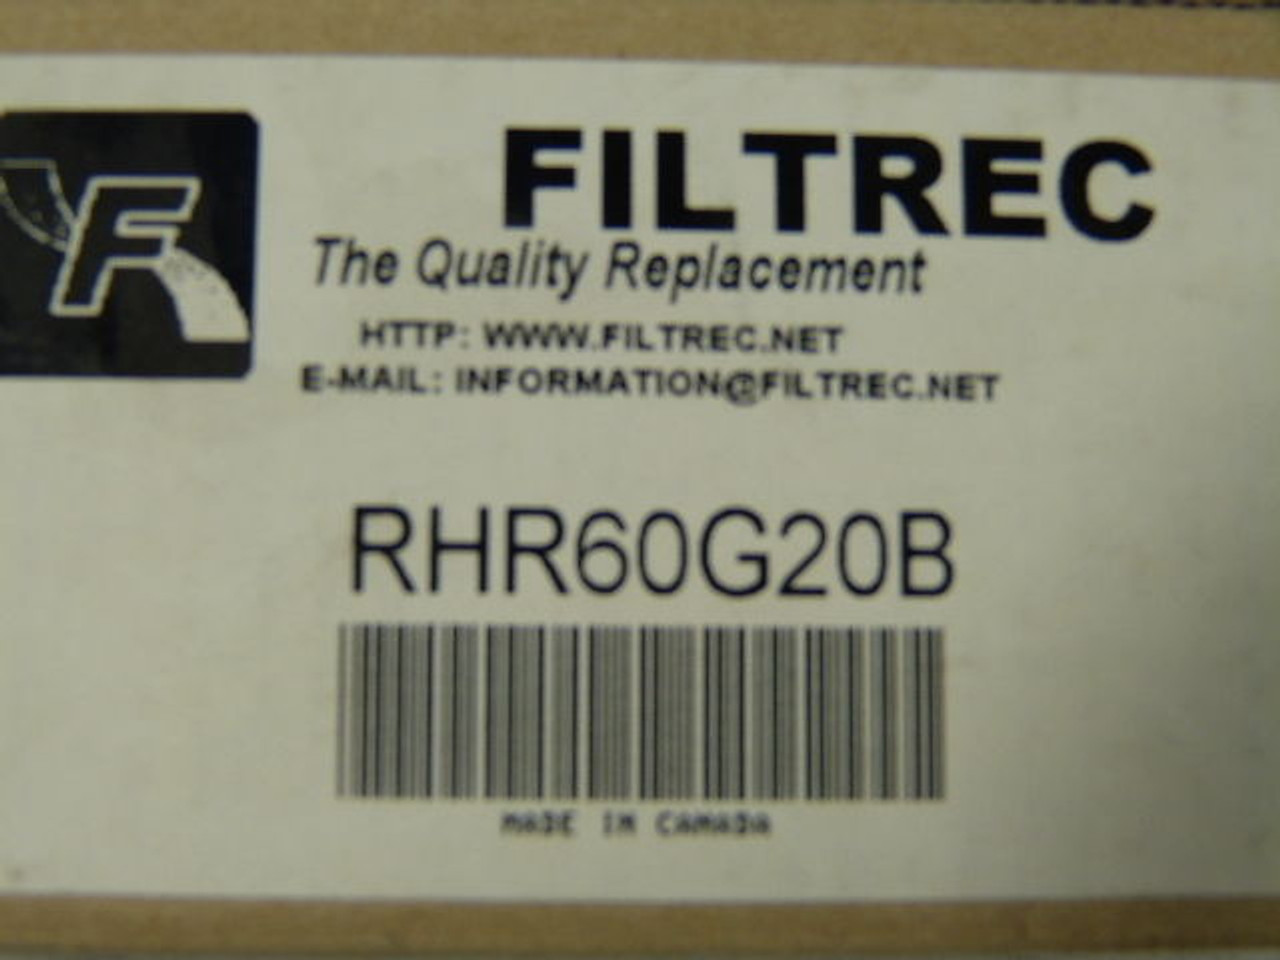 Filtrec RHR60G20B Hydraulic Replacement Filter Element 25Micron 3.9" ! NEW !